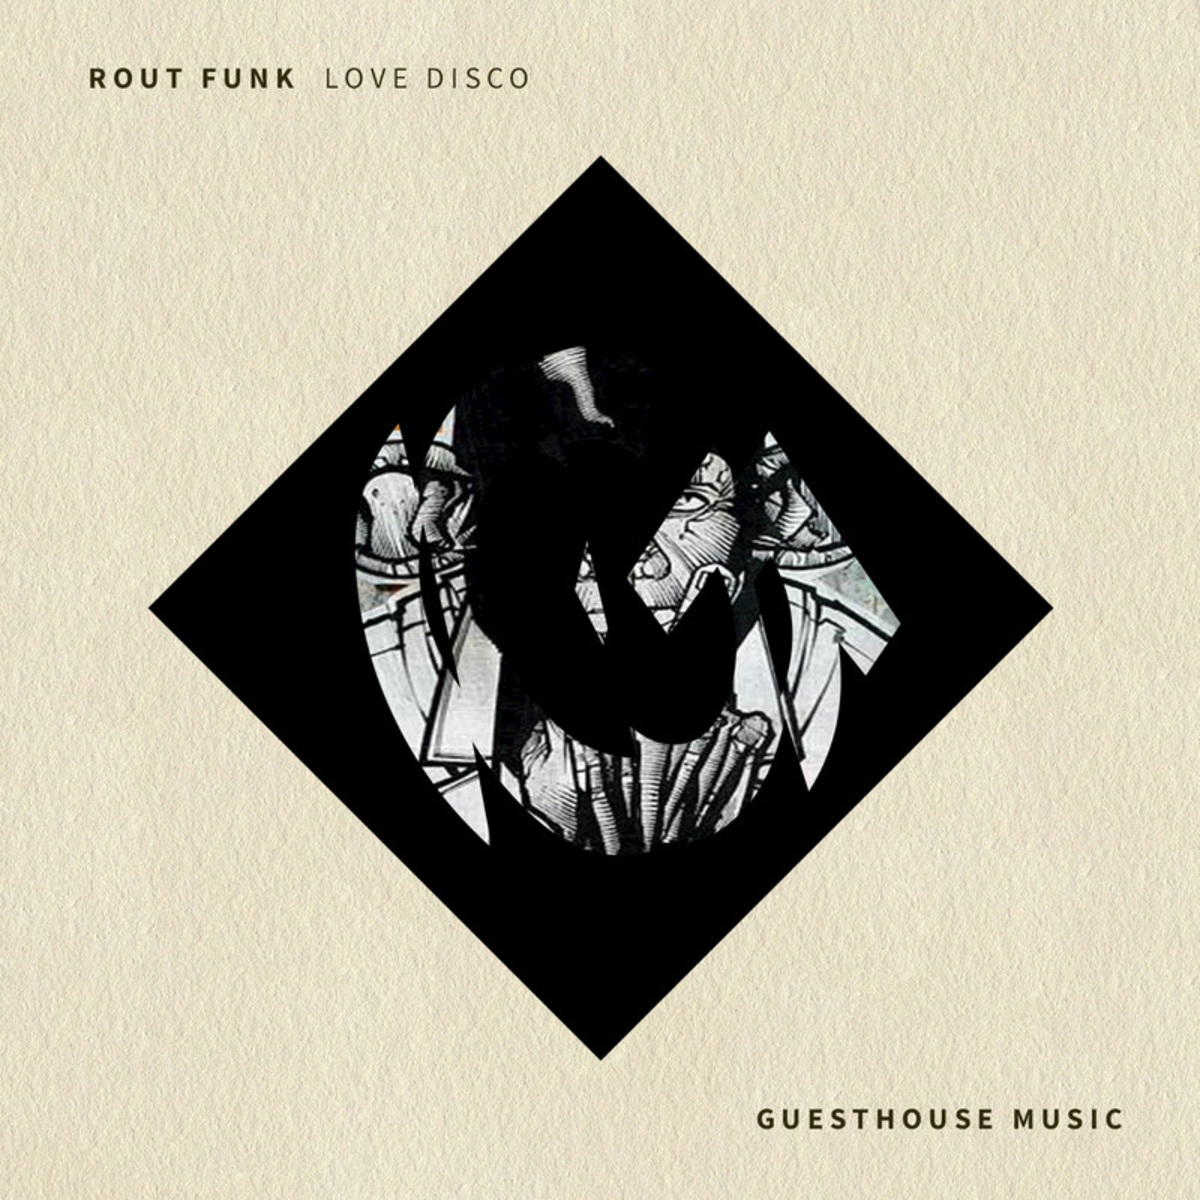 Rout Funk - Lovedisco / Guesthouse Music